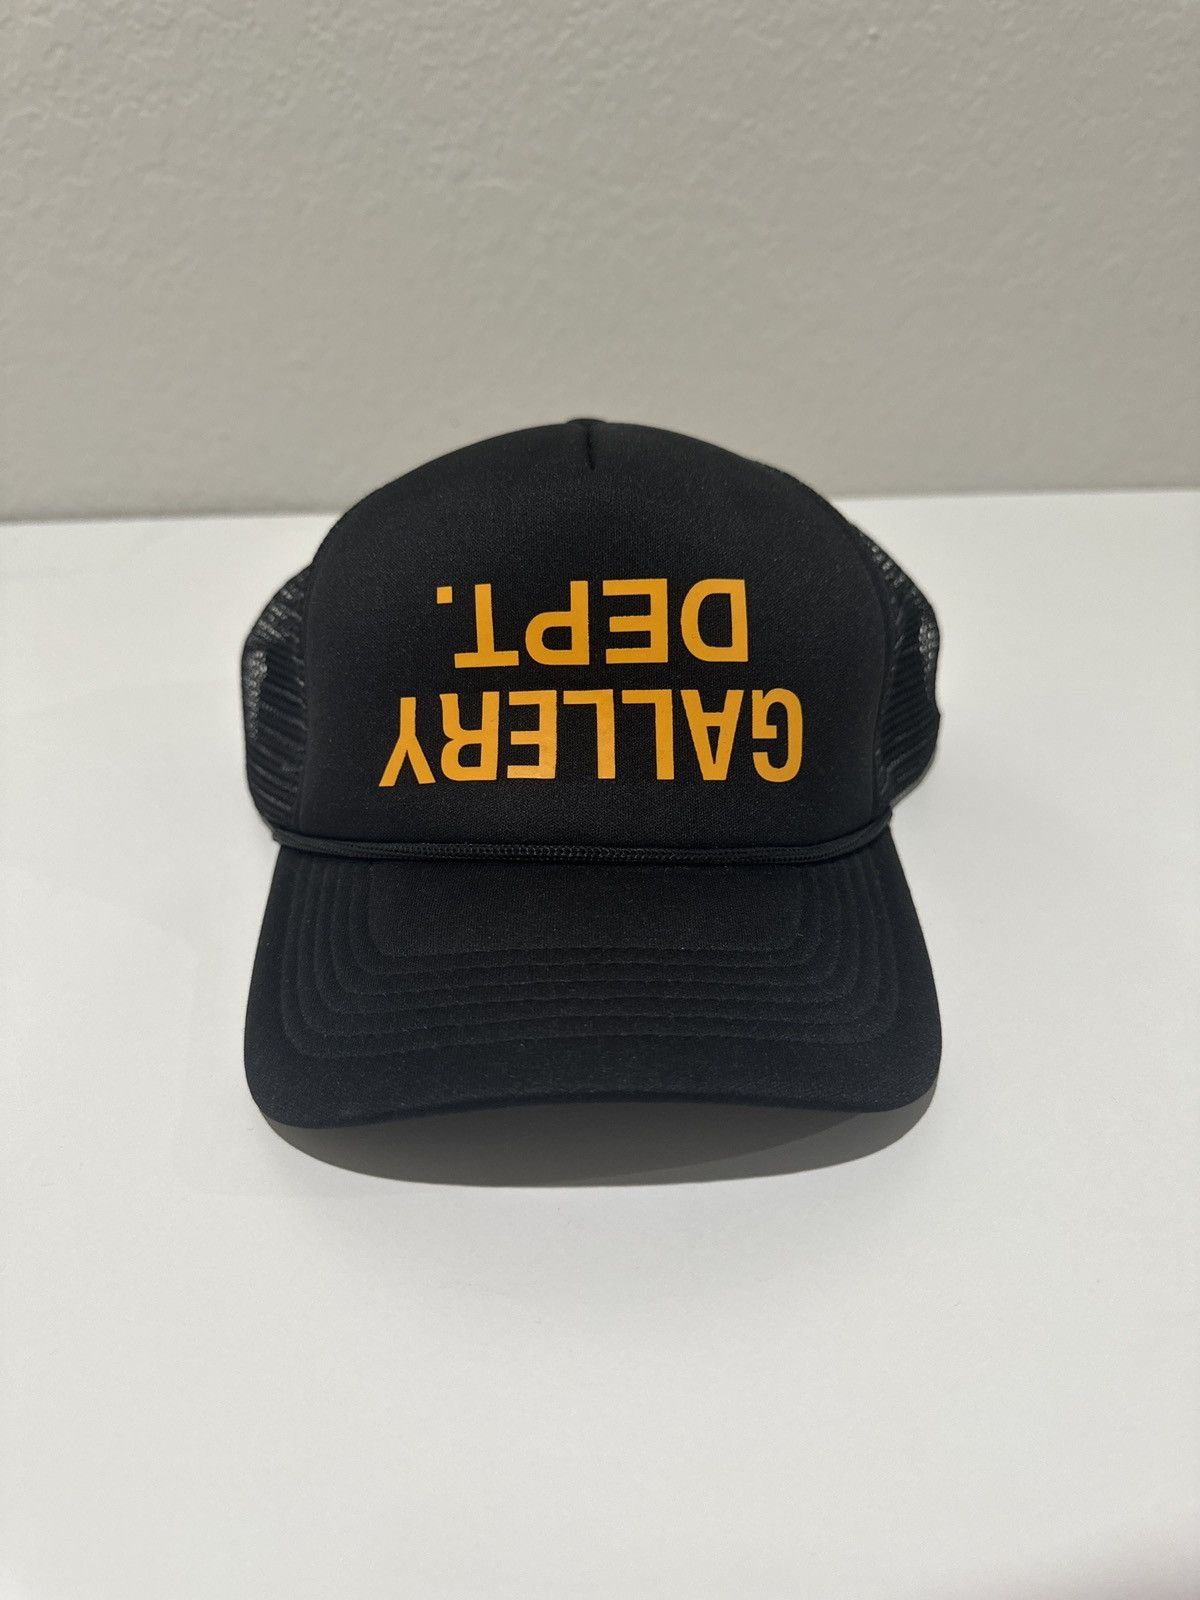 Gallery Dept Fucked Up Hat | Grailed